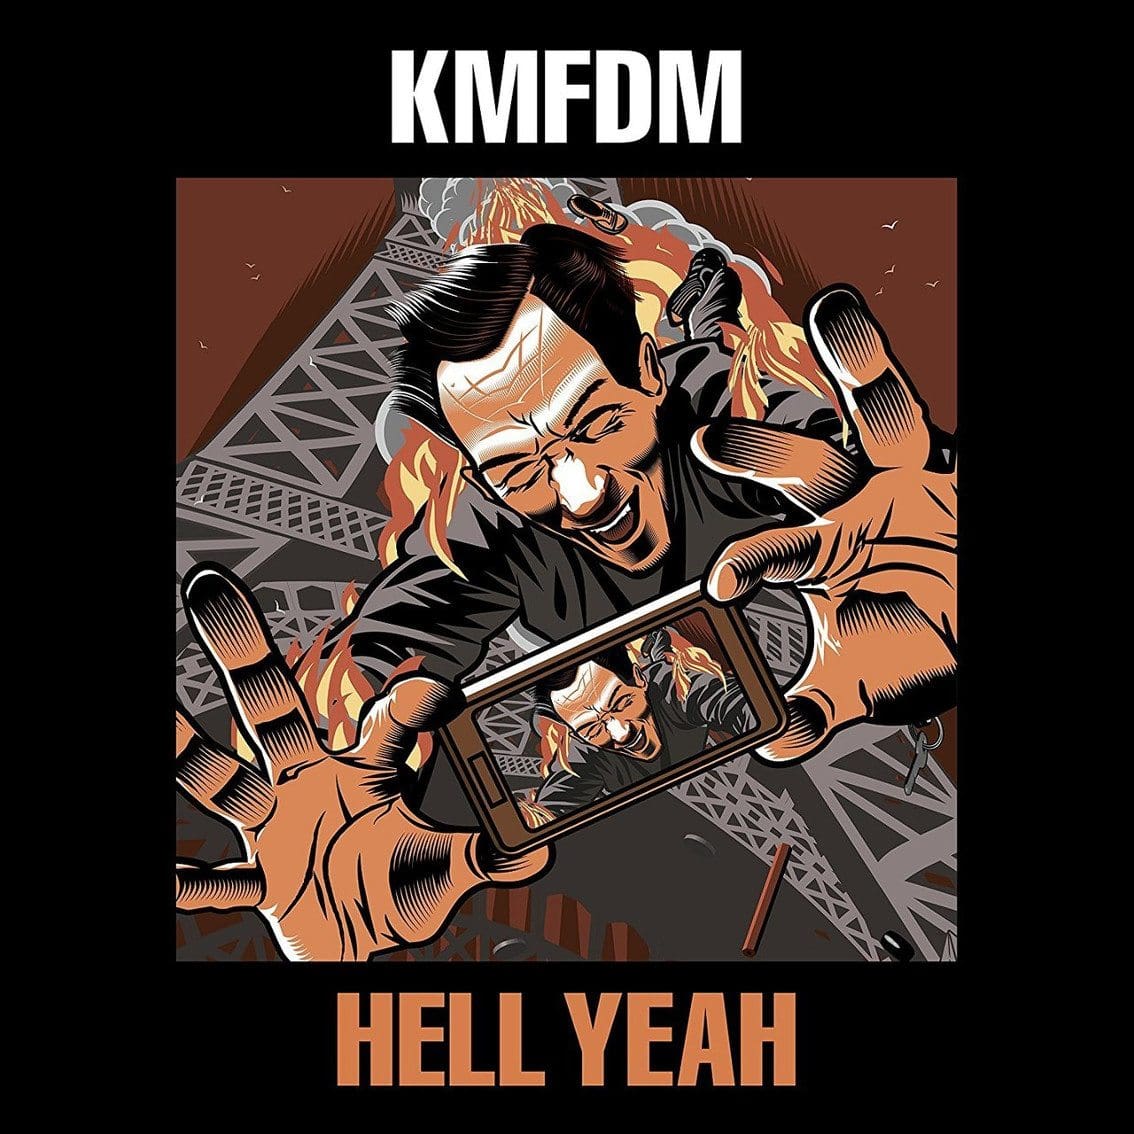 KMFDM ready to release first album in 3 years on vinyl and CD - check the full details